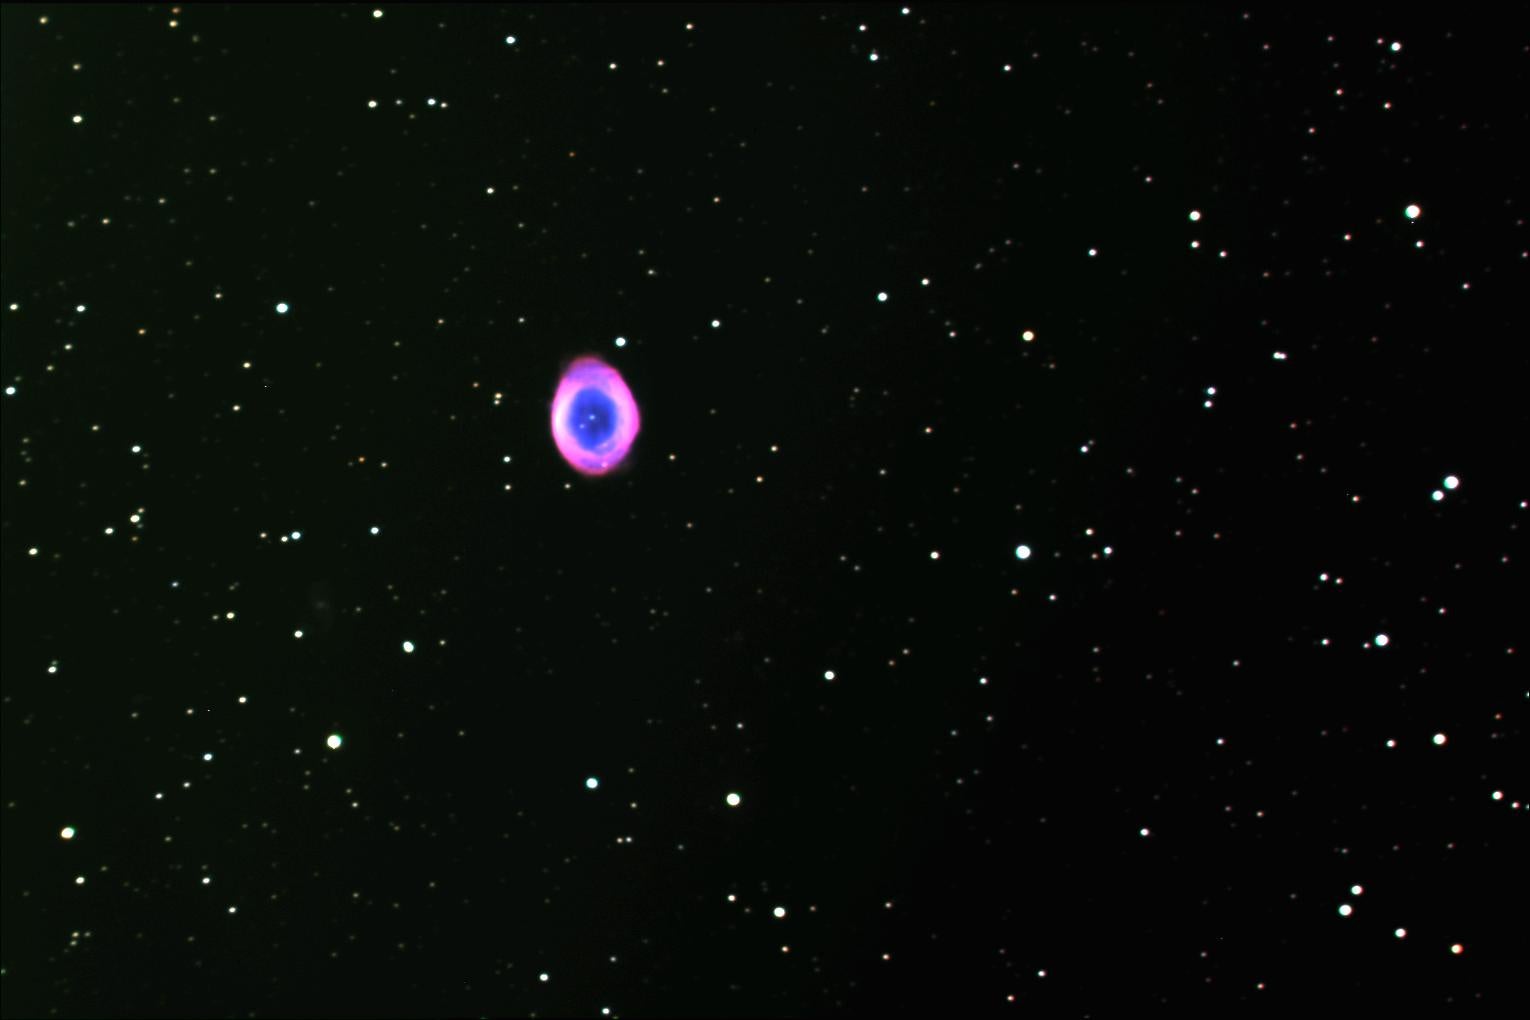 A starry sky with a pink and blue orb in the center